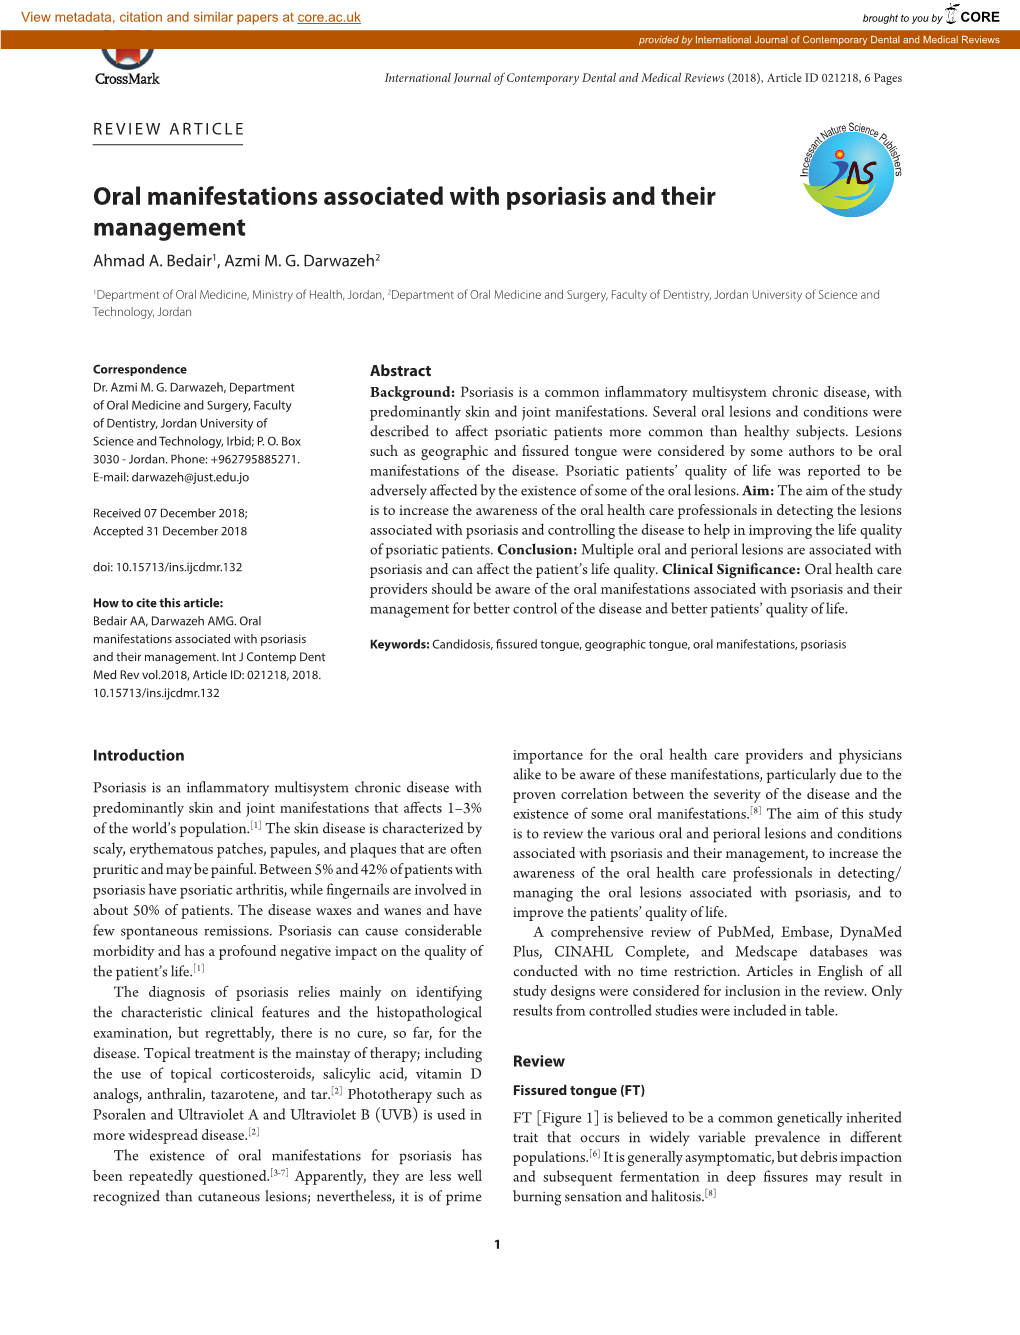 Oral Manifestations Associated with Psoriasis and Their Management Ahmad A